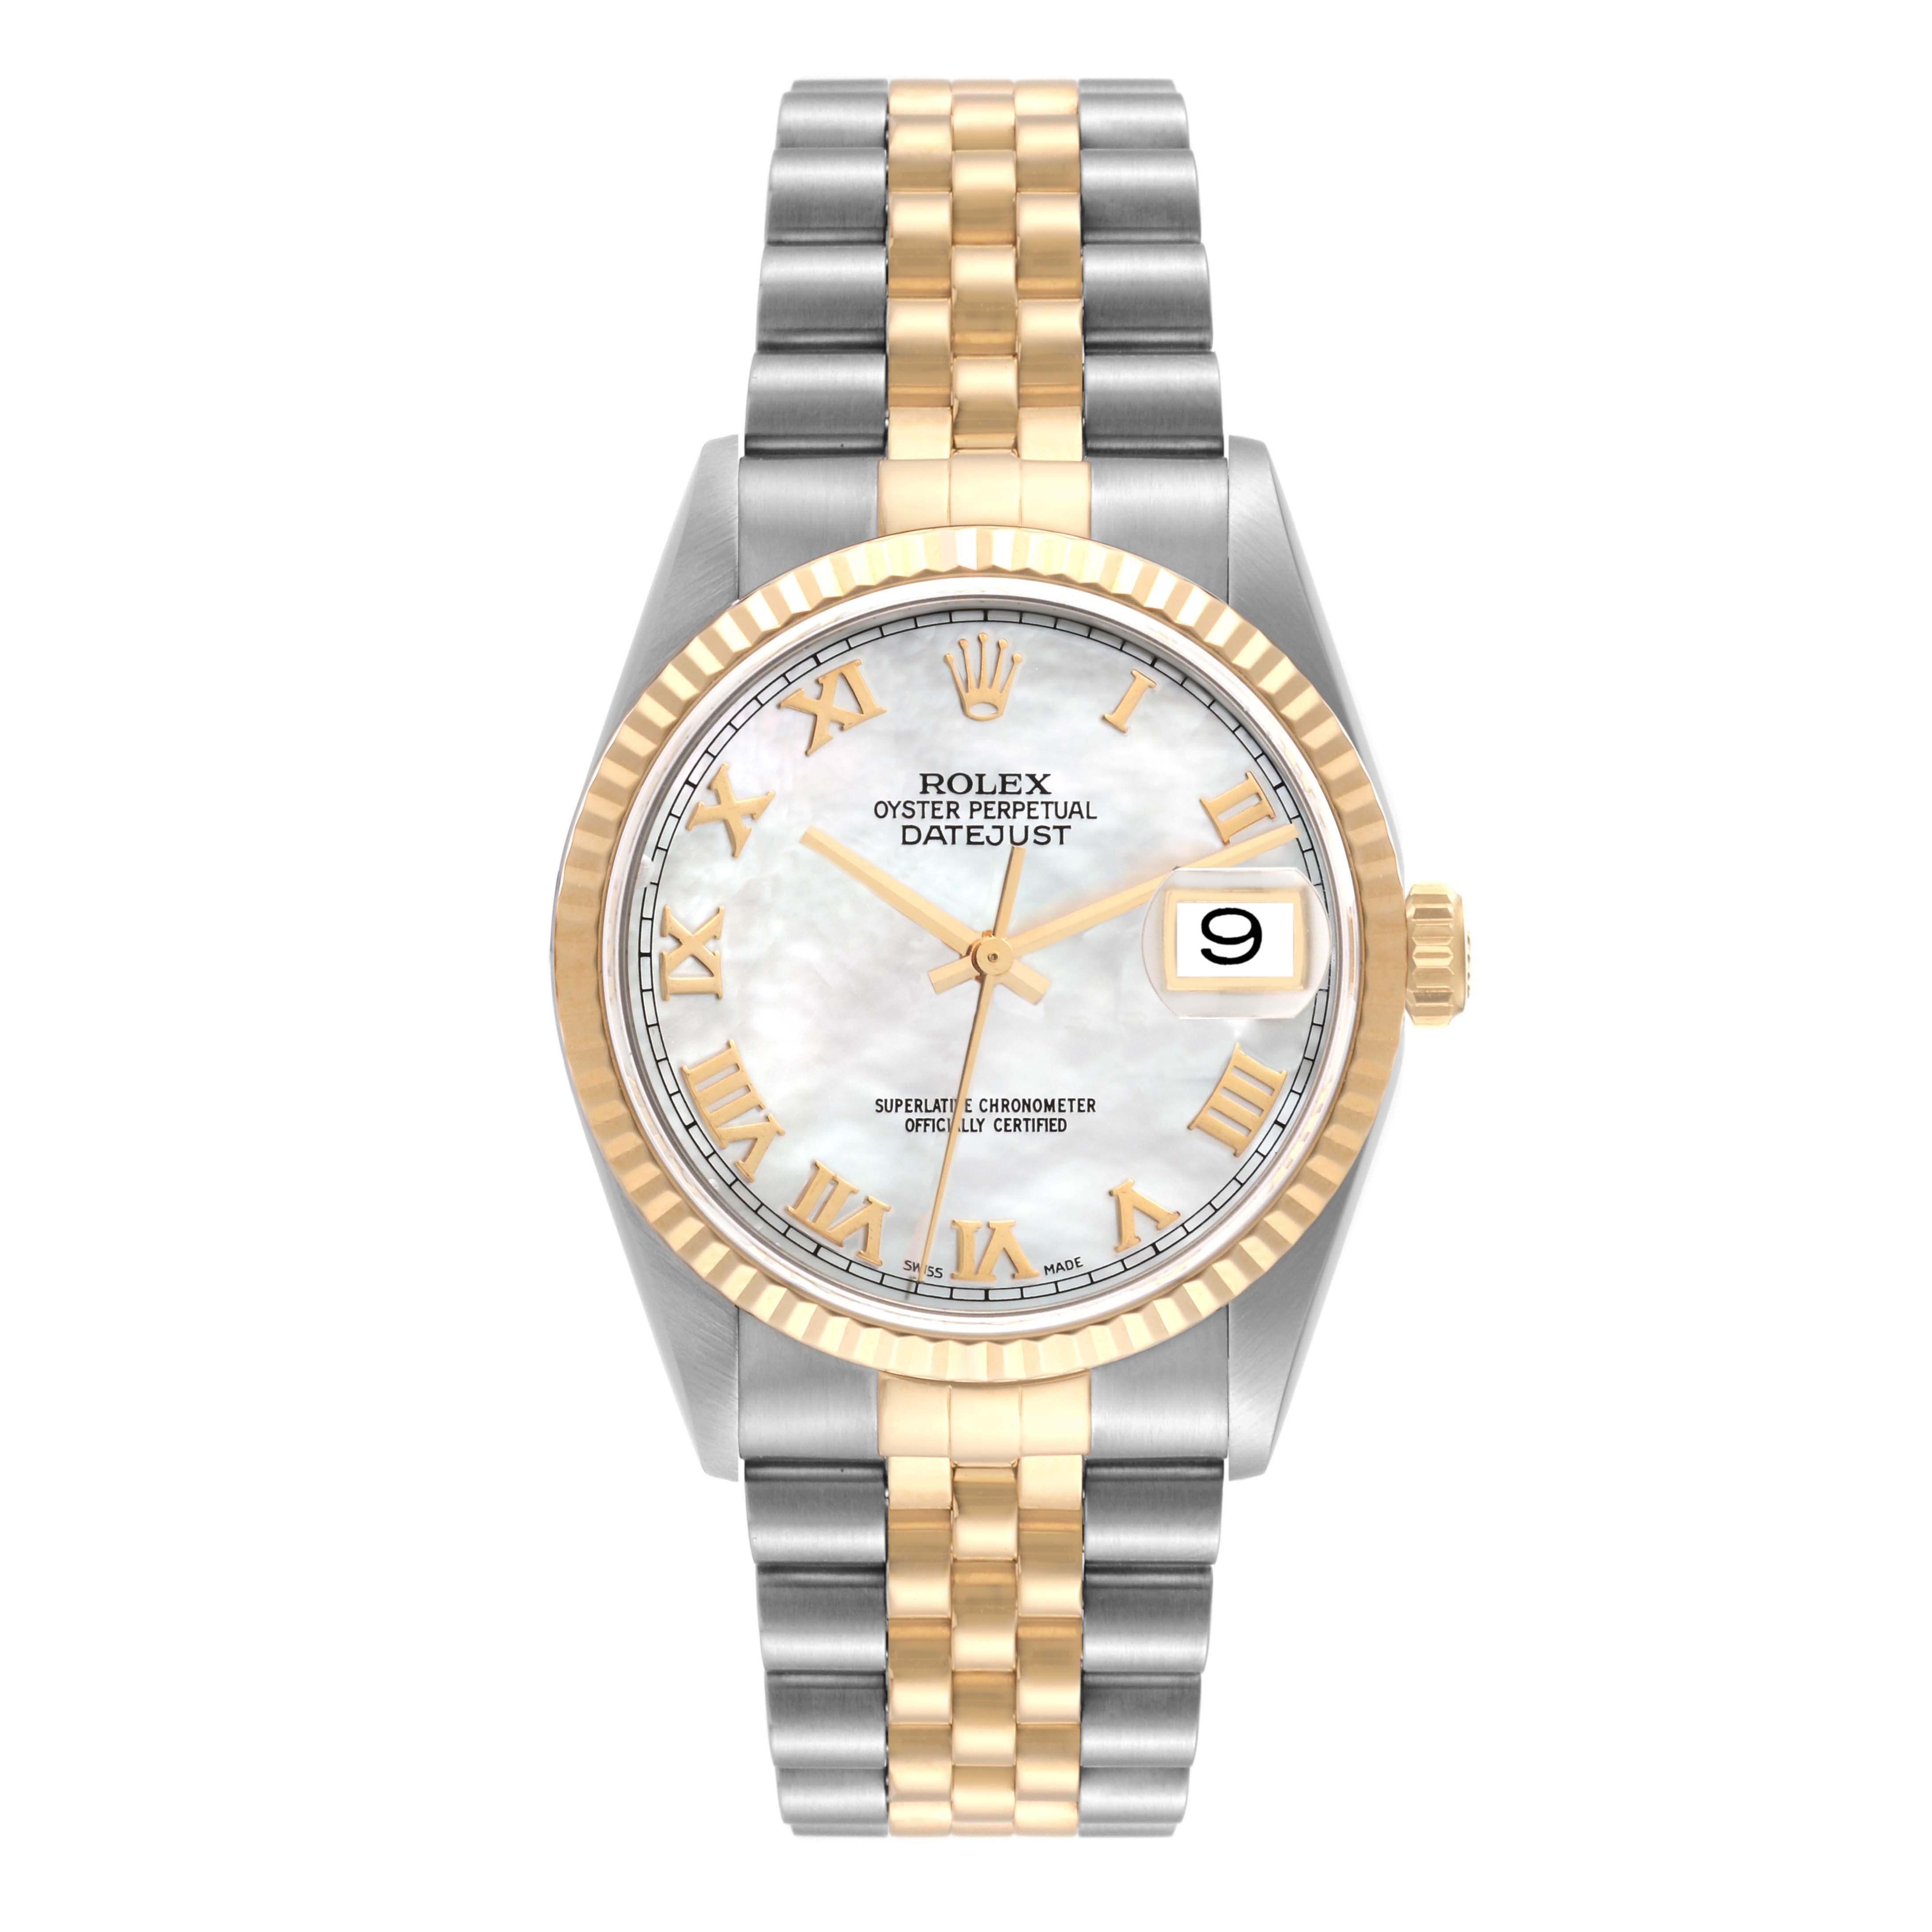 Rolex Datejust Steel Yellow Gold Mother Of Pearl Dial Mens Watch 16233. Officially certified chronometer automatic self-winding movement. Stainless steel case 36 mm in diameter.  Rolex logo on an 18K yellow gold crown. 18k yellow gold fluted bezel.